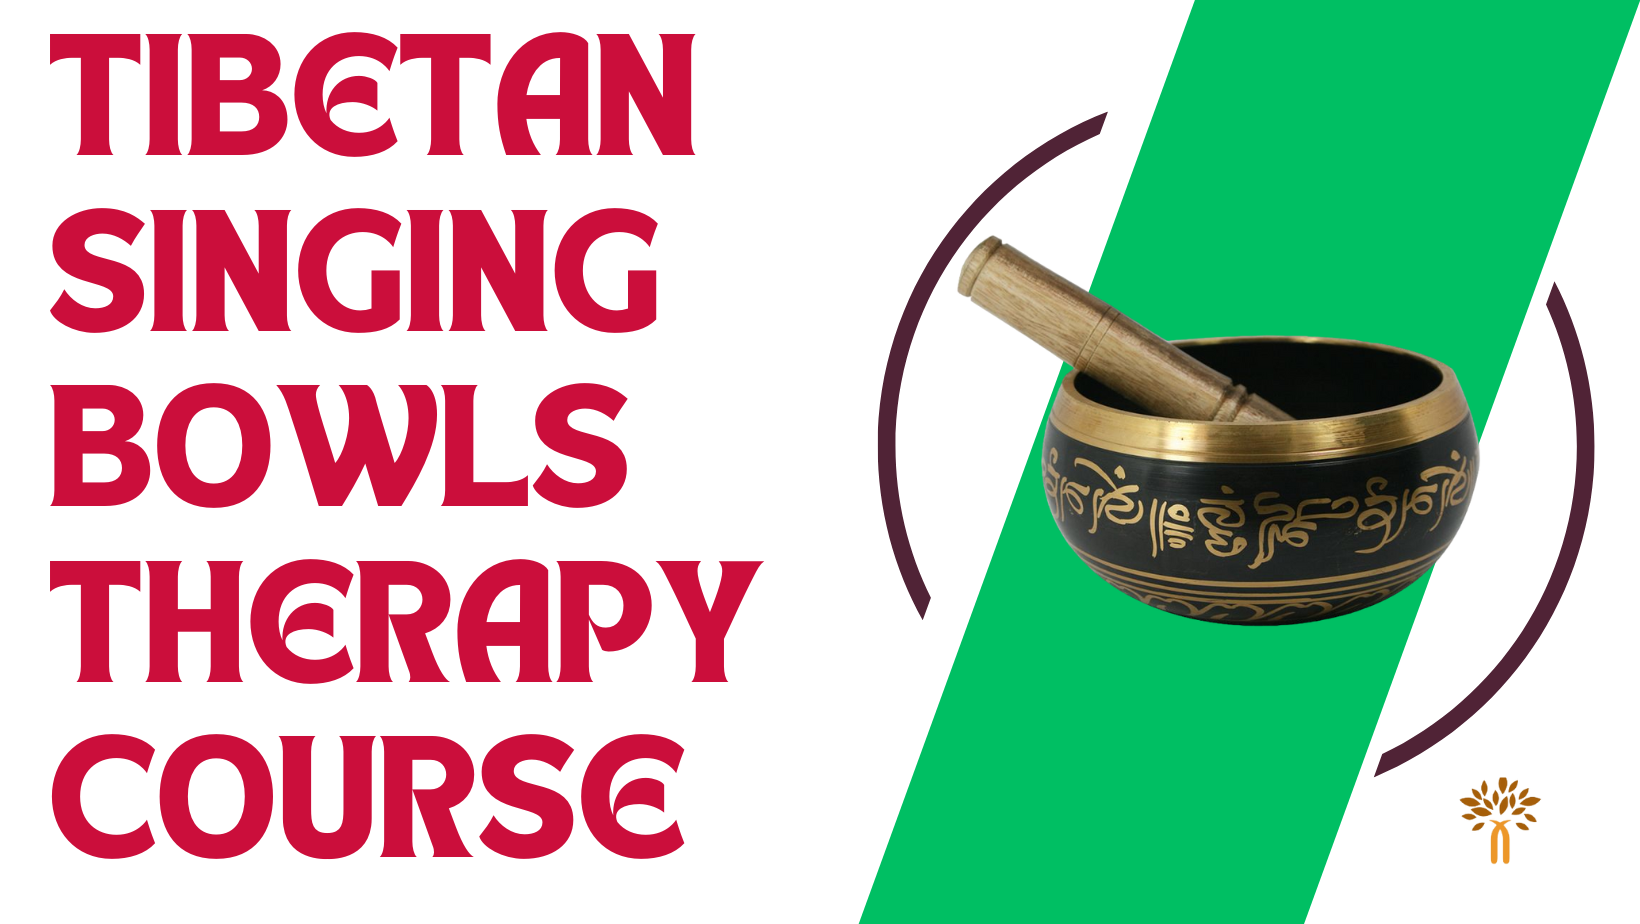 Tibetan Singing Bowls Therapy Courses in Bangalore